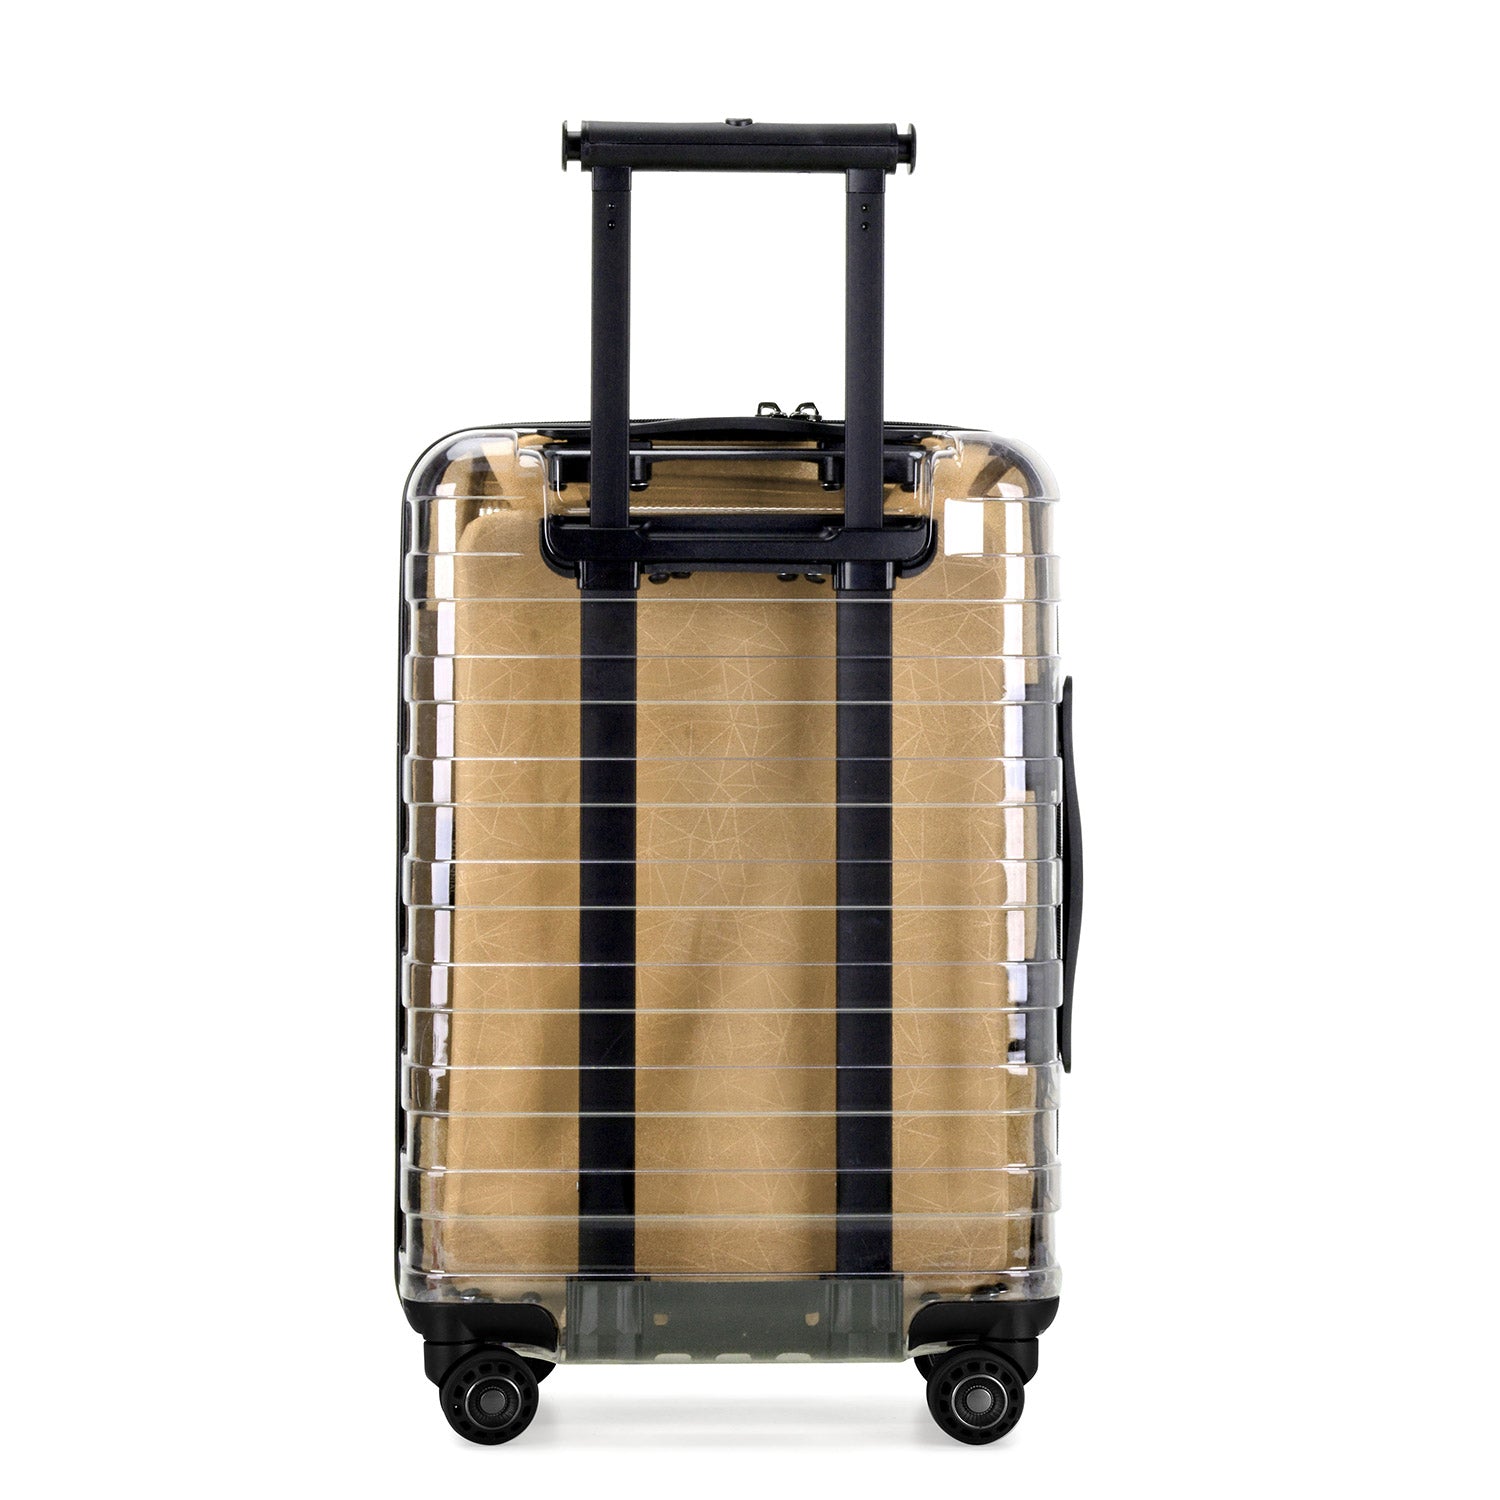 The Millennial II Transparent Carry-On 22&quot; Hardside Spinner Luggage